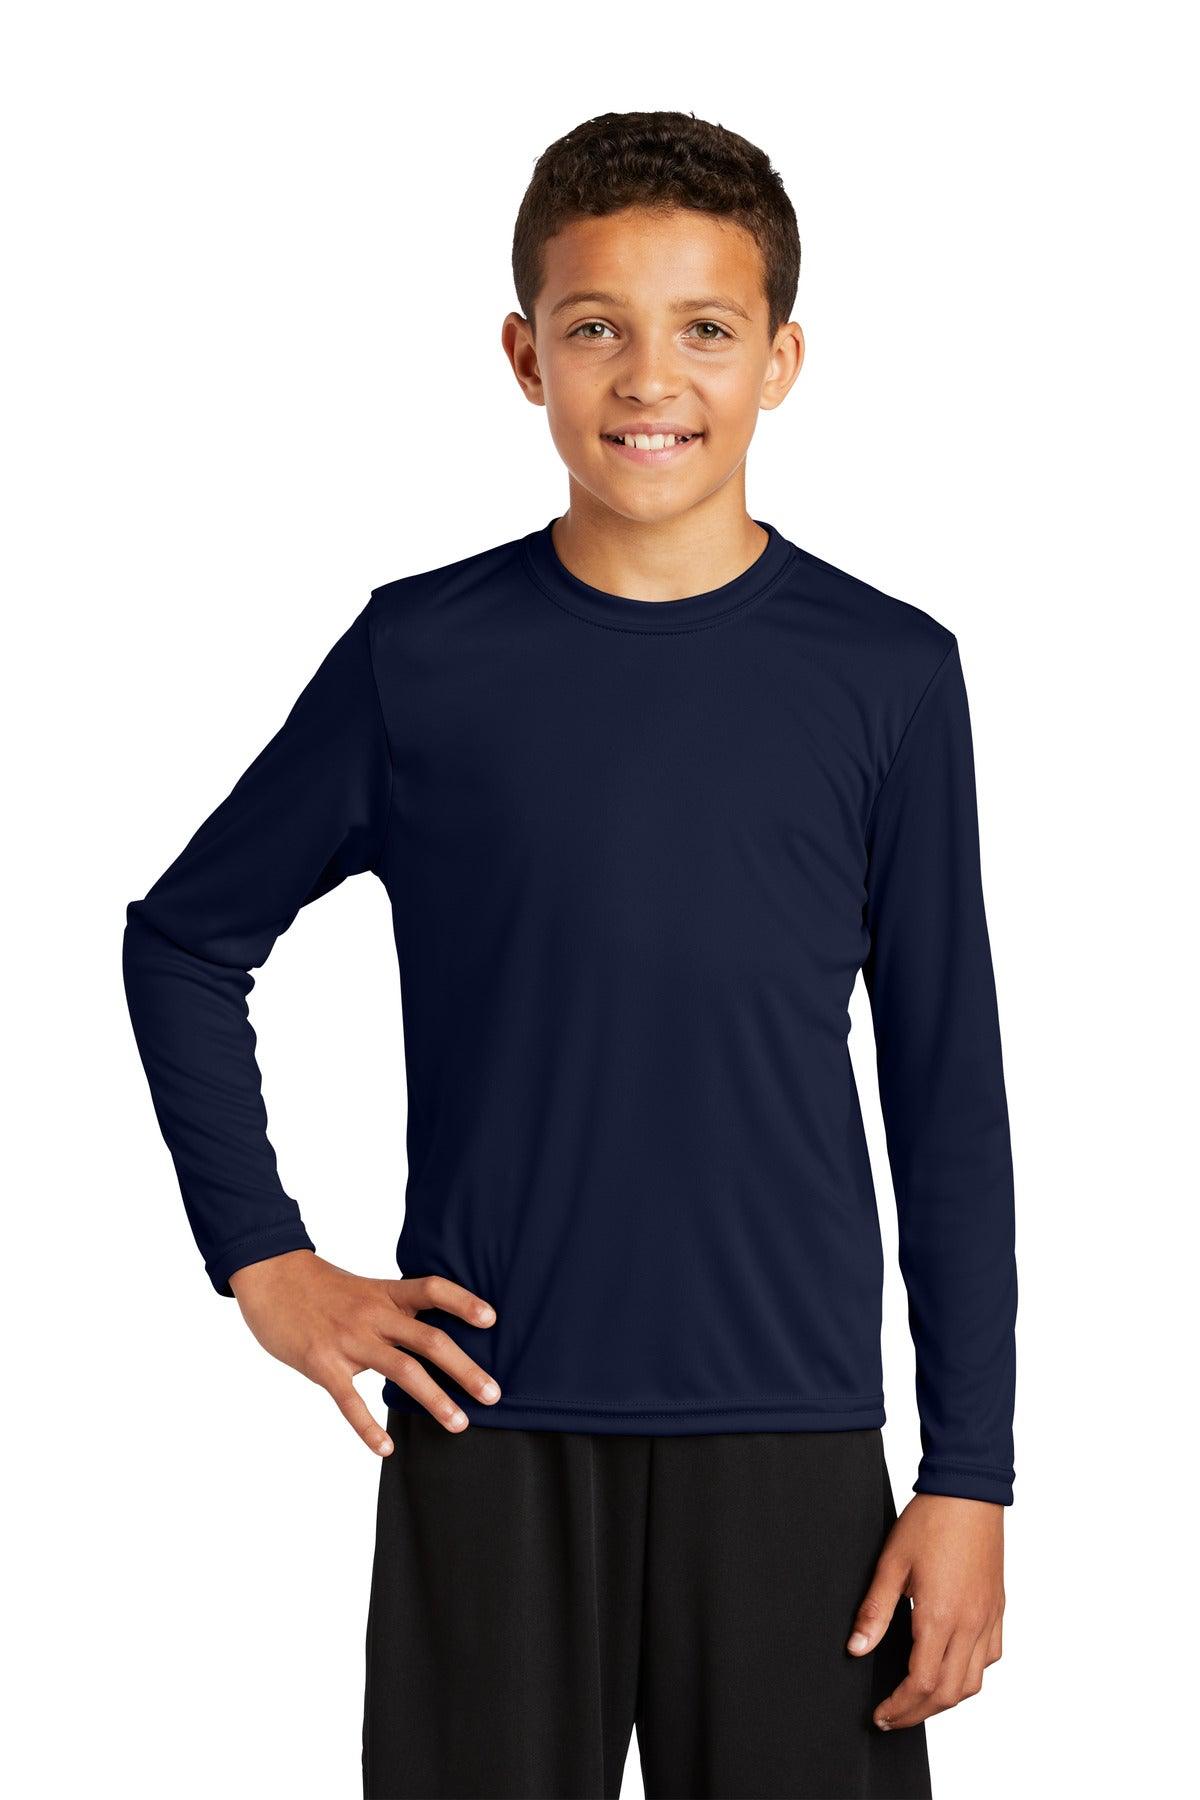 Sport-Tek Youth Long Sleeve PosiCharge Competitor Tee. YST350LS - Dresses Max